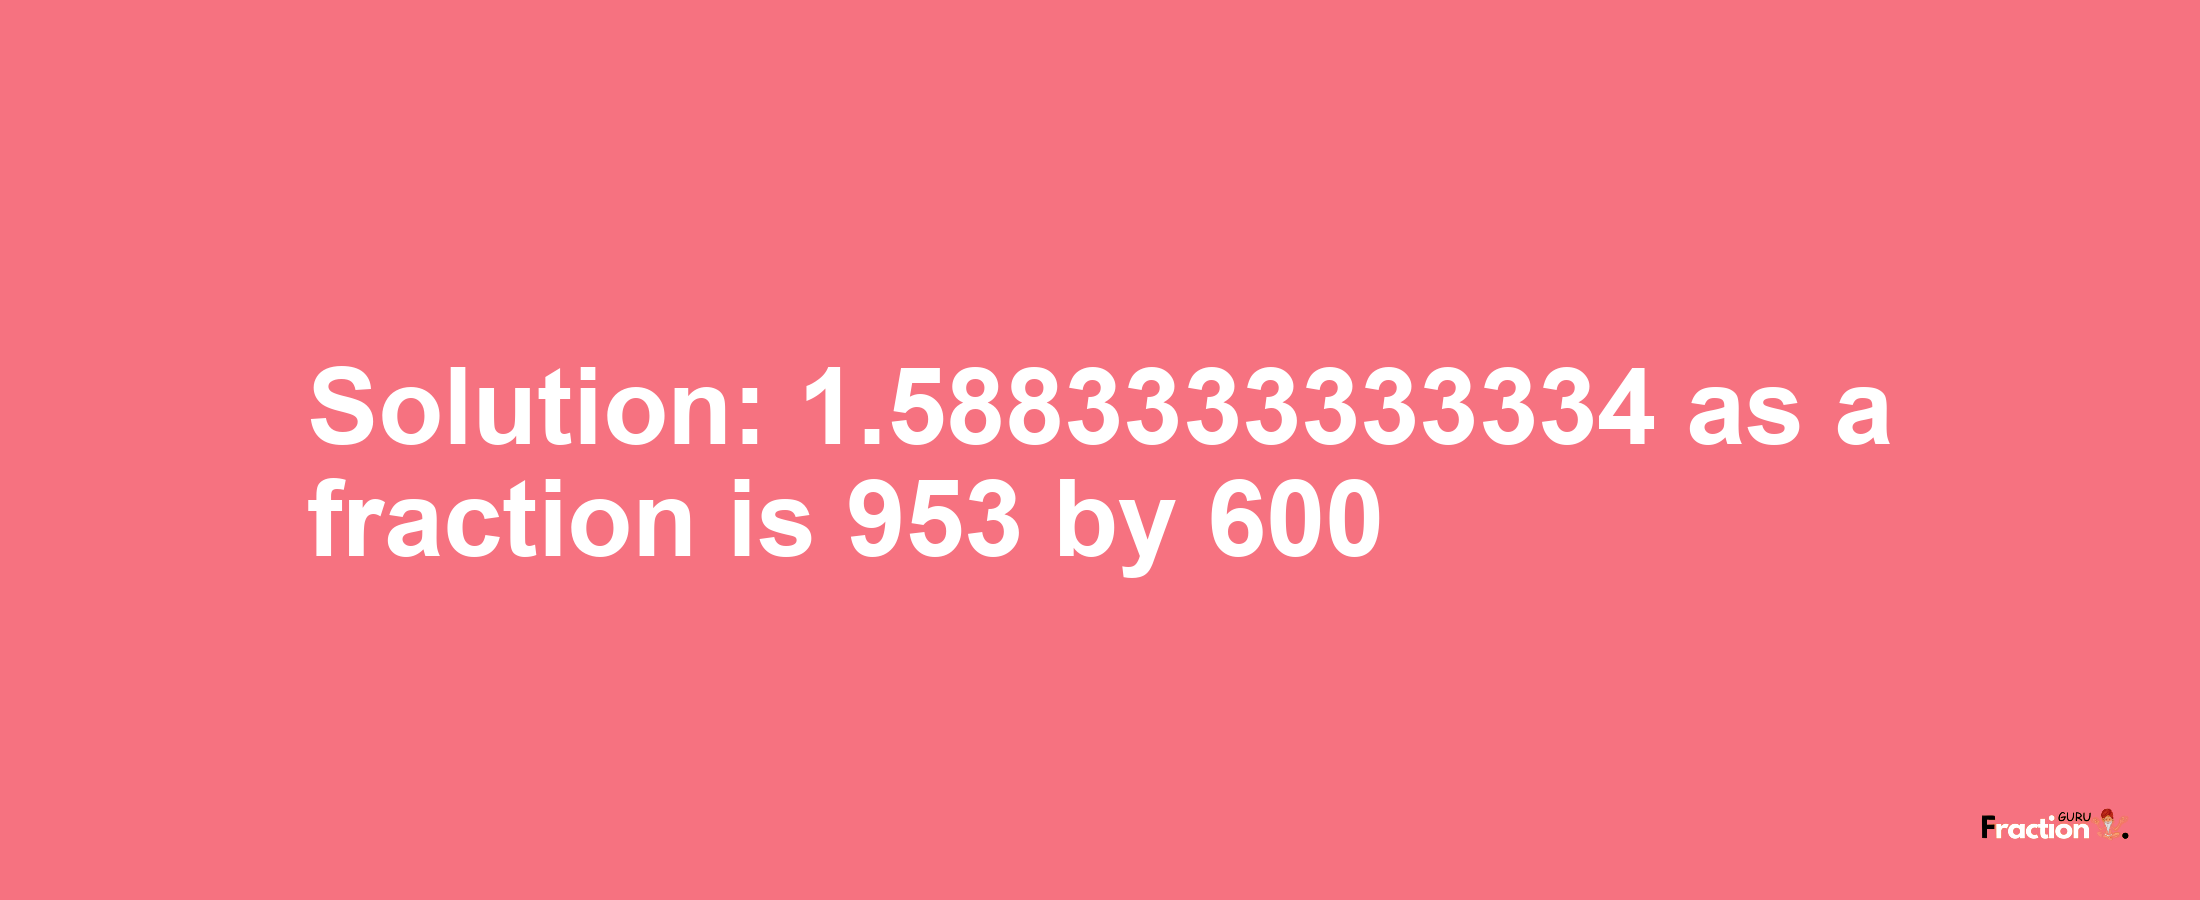 Solution:1.5883333333334 as a fraction is 953/600